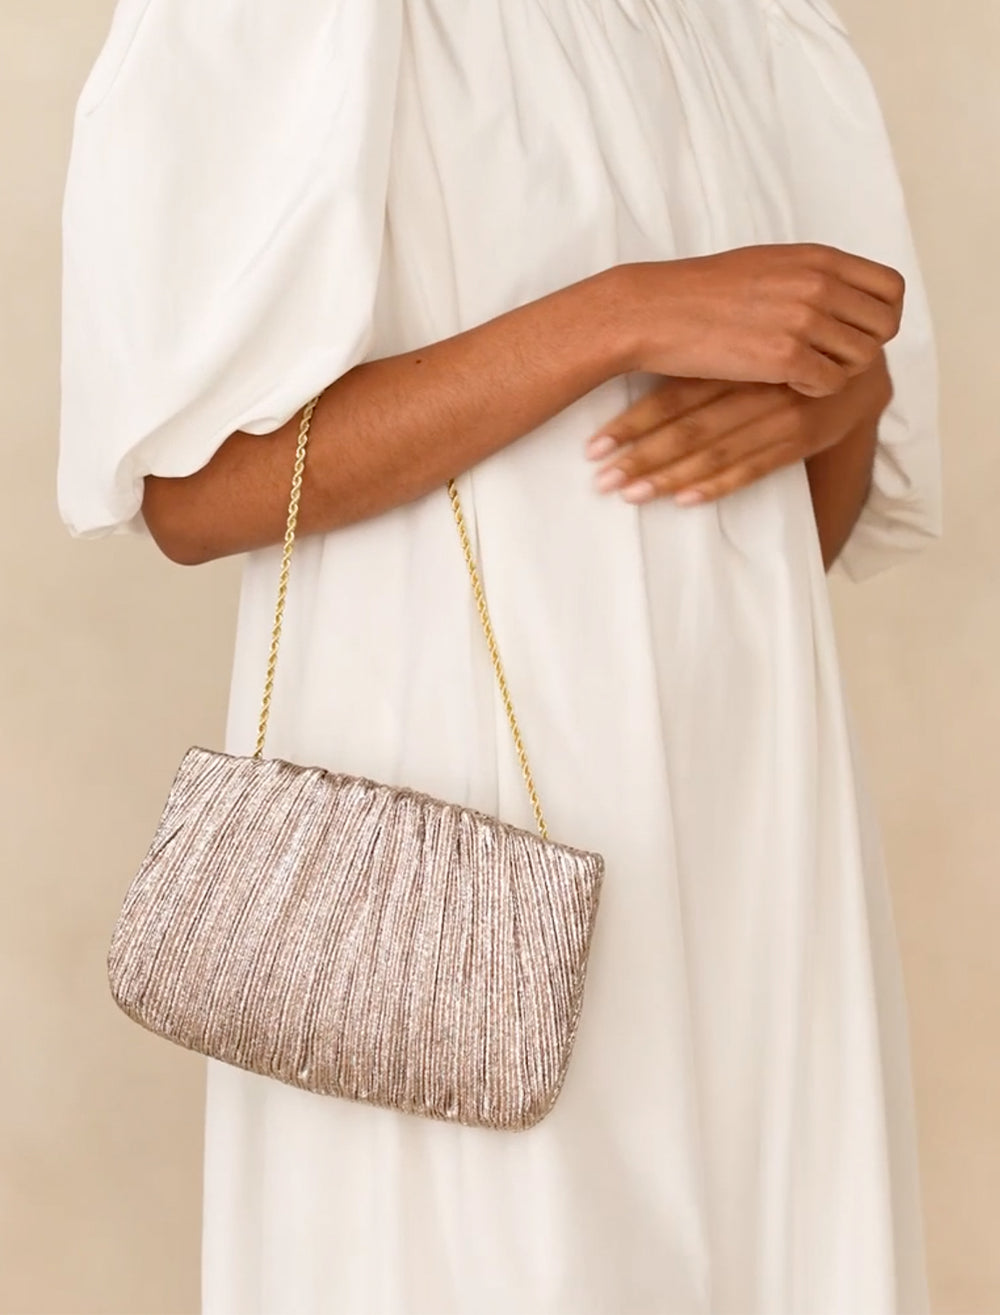 Model carrying Loeffler Randall's brit flat pleated pouch in champagne.